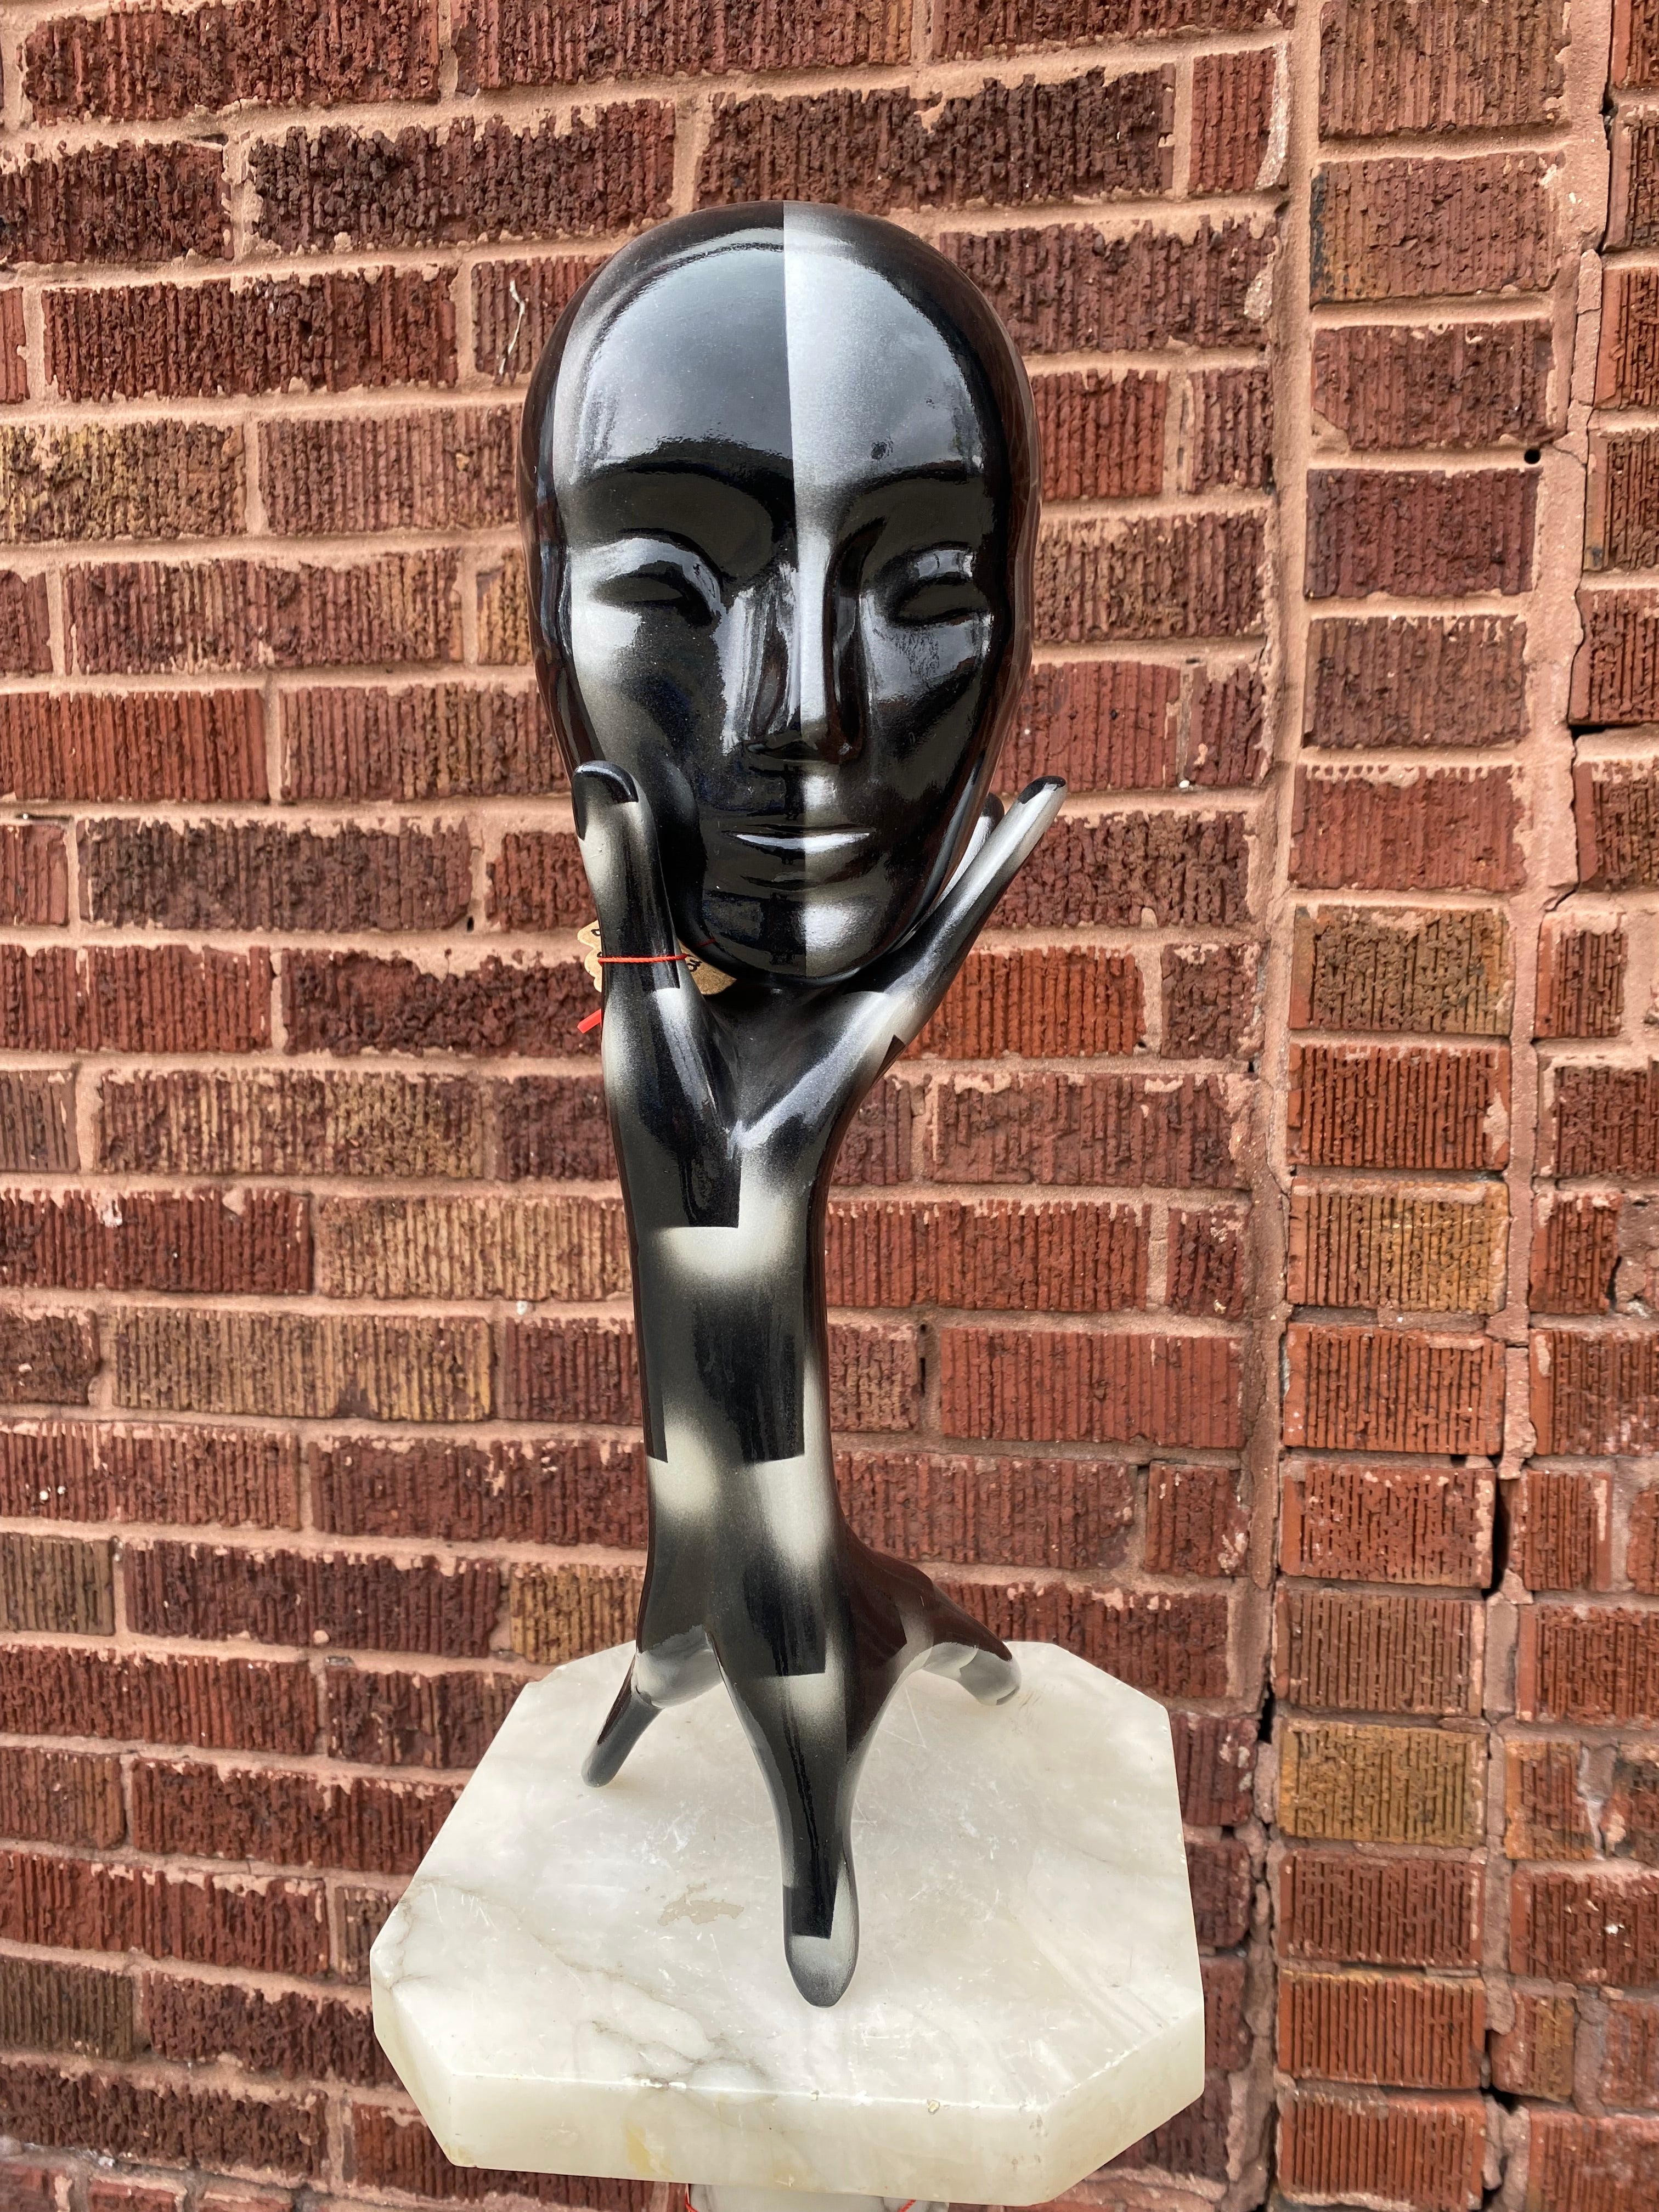 Head-in-Hand 1990s Short Black and Silver Sculpture